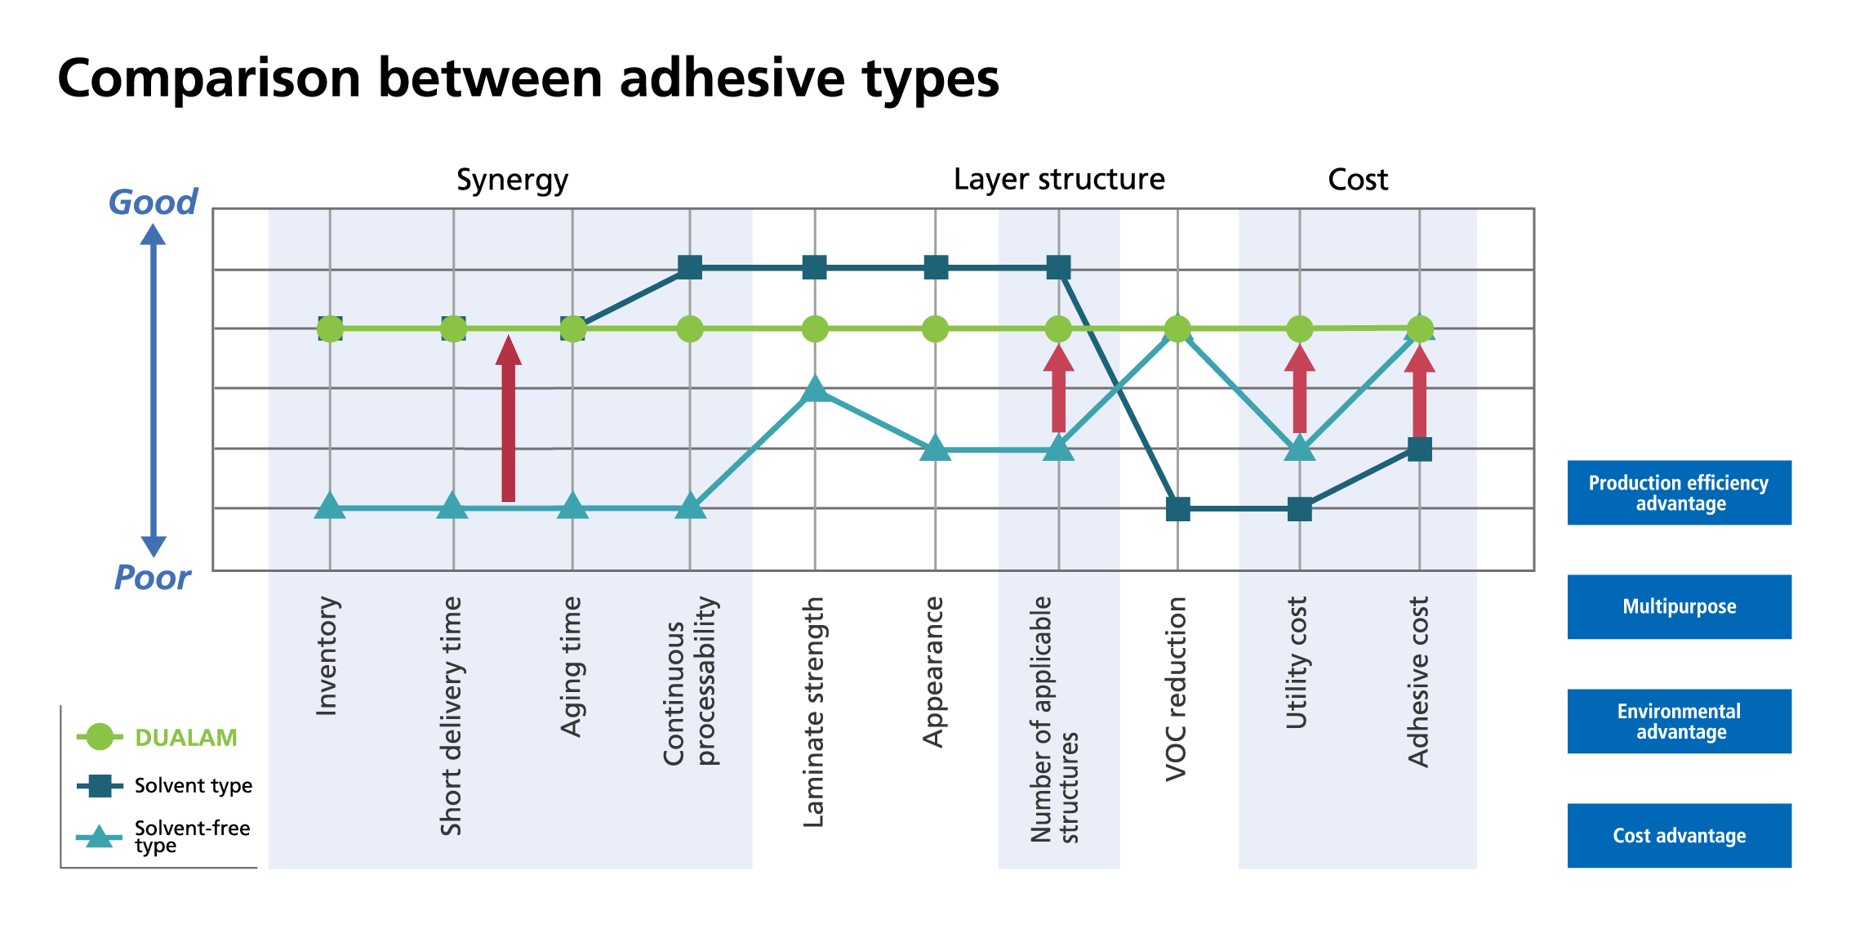 Comparison between adhesive types